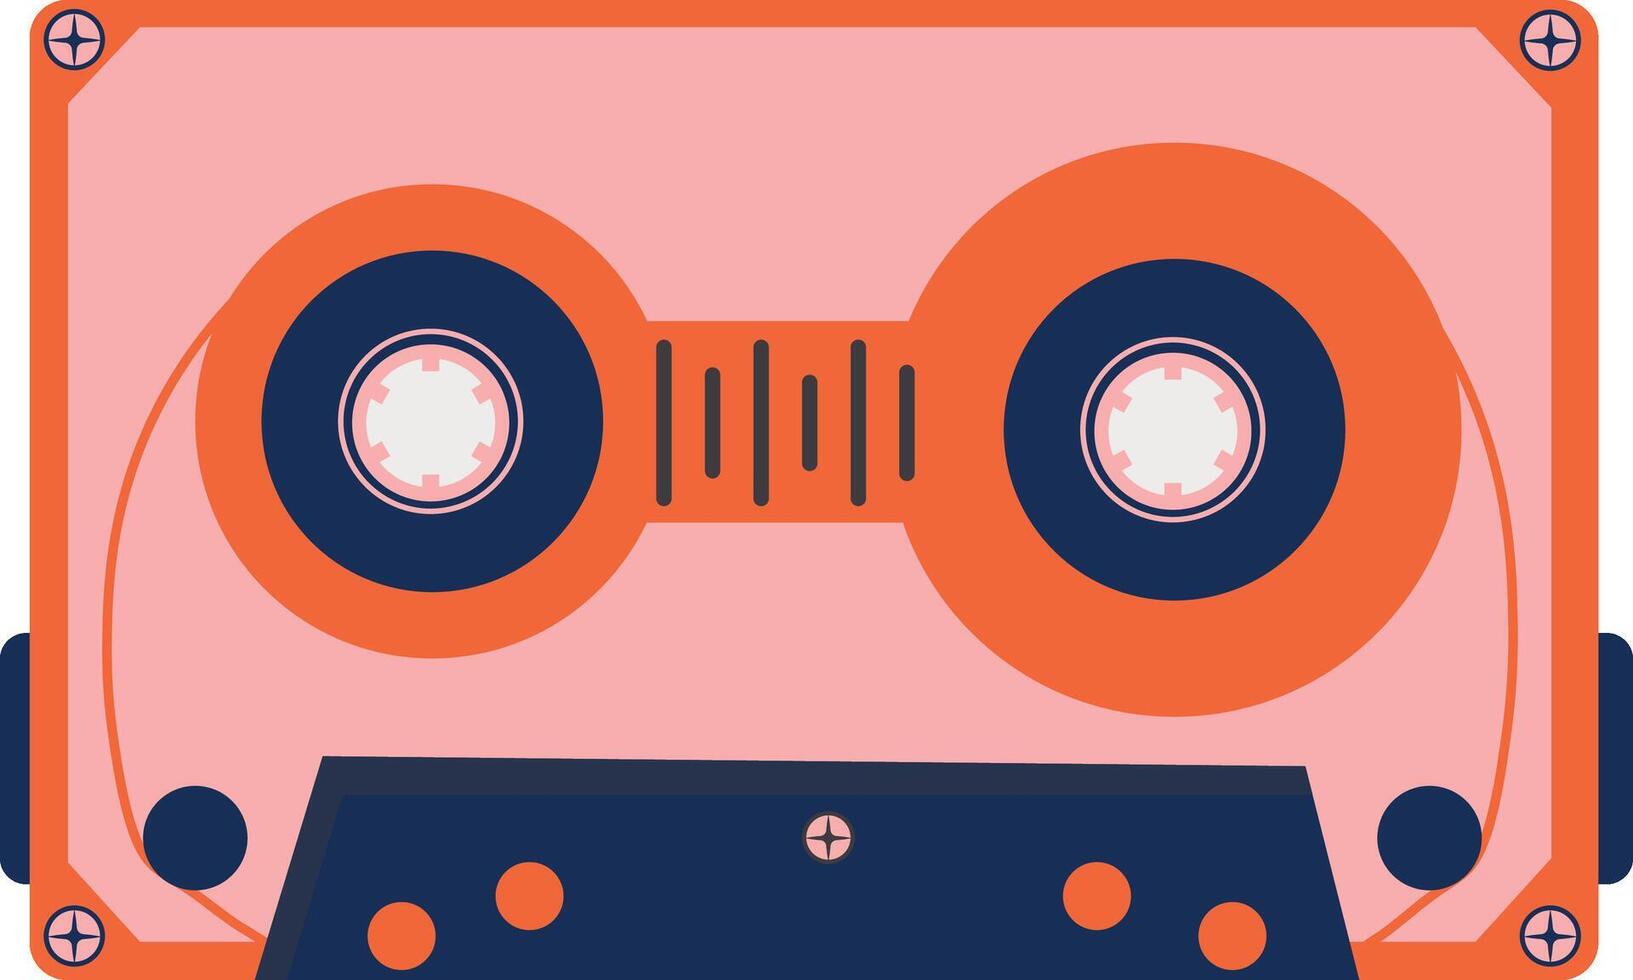 Retro Cassette with Classic Style. 80s Pop Songs and Stereo Music Cassettes. Isolated Icon vector